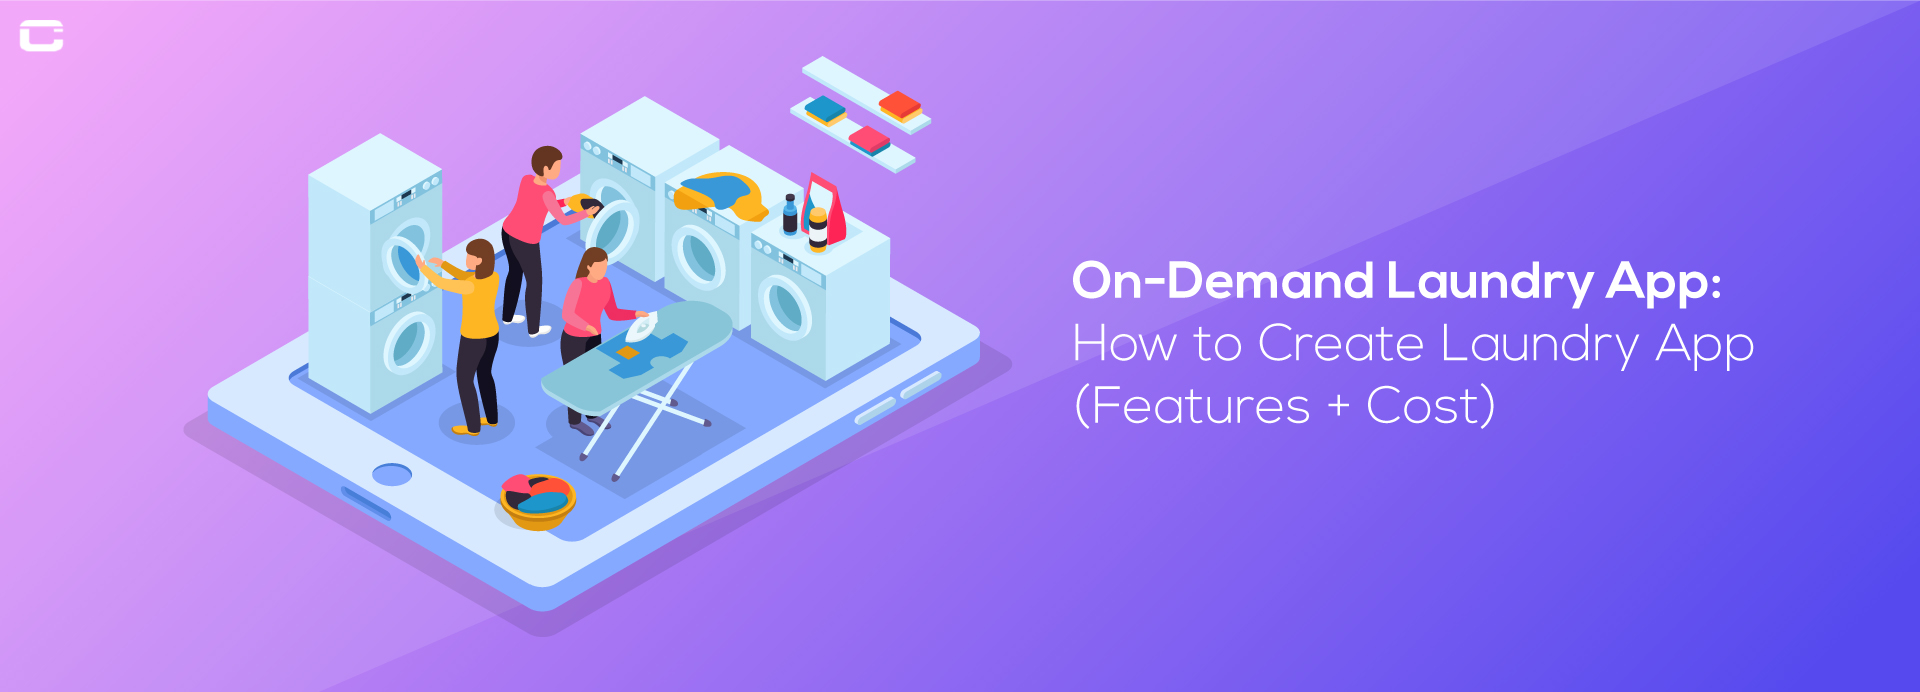 On-Demand Laundry App: How to create Laundry App (Features+Cost)